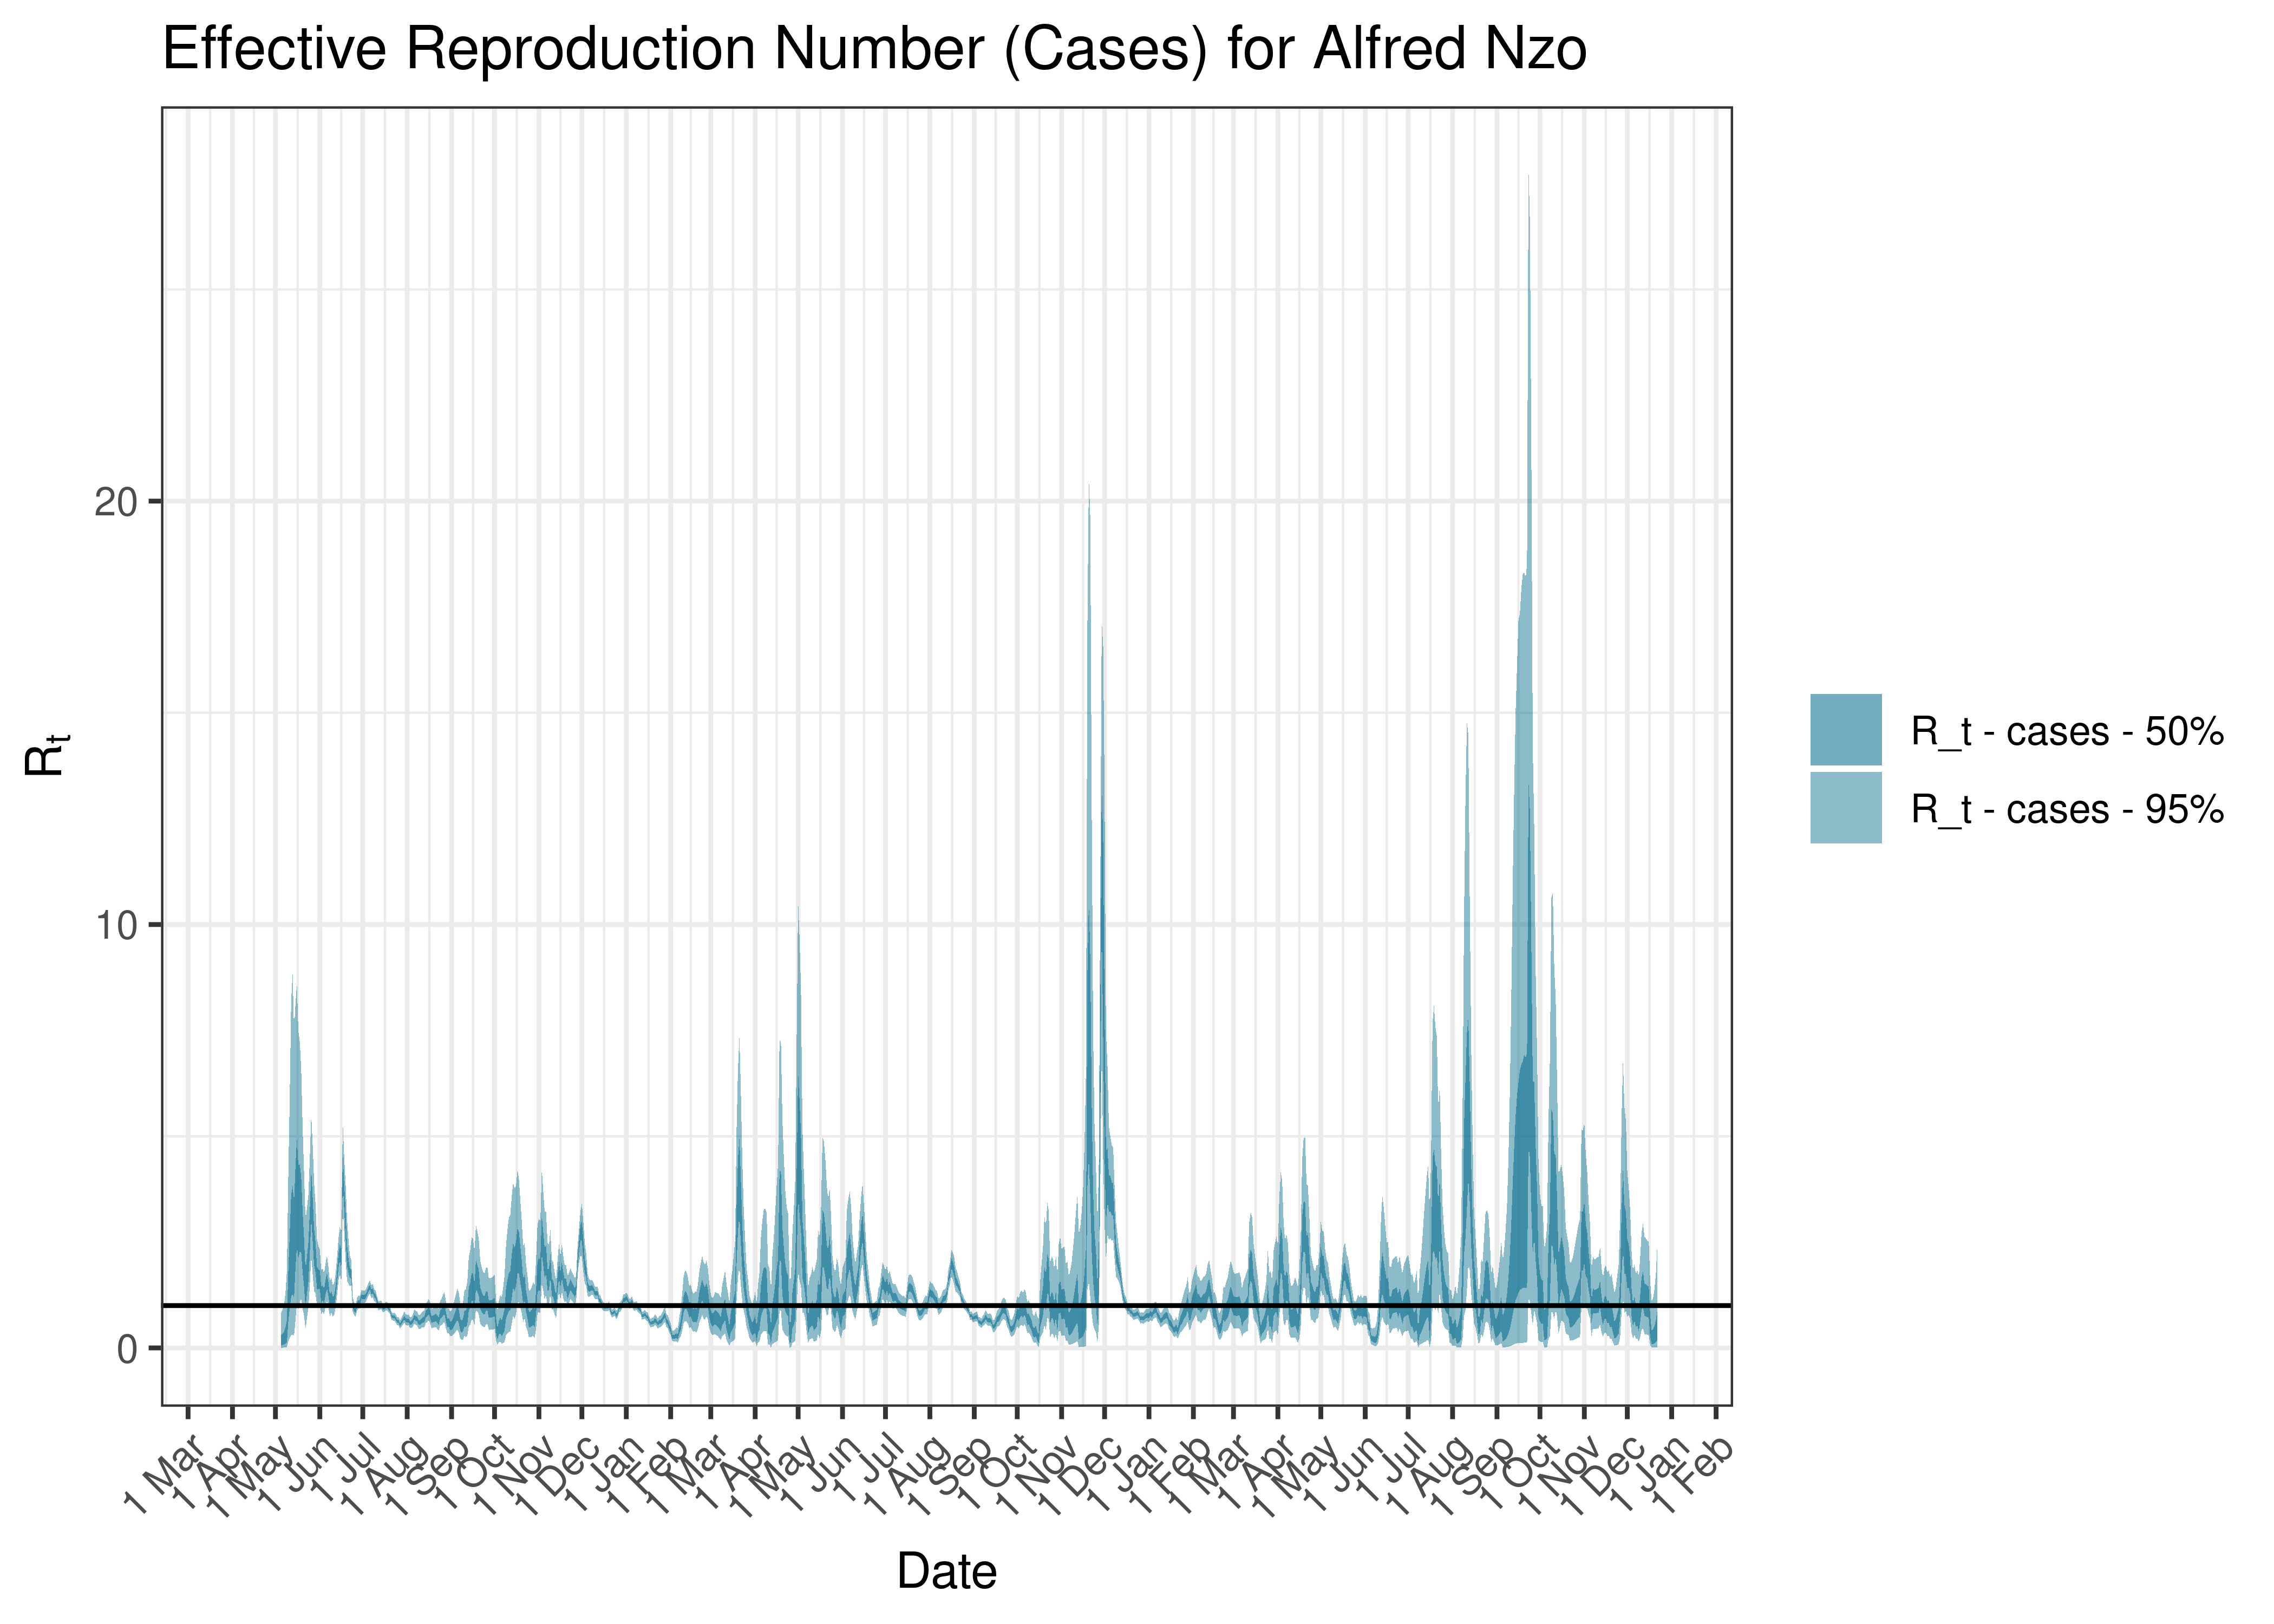 Estimated Effective Reproduction Number Based on Cases for Alfred Nzo since 1 April 2020